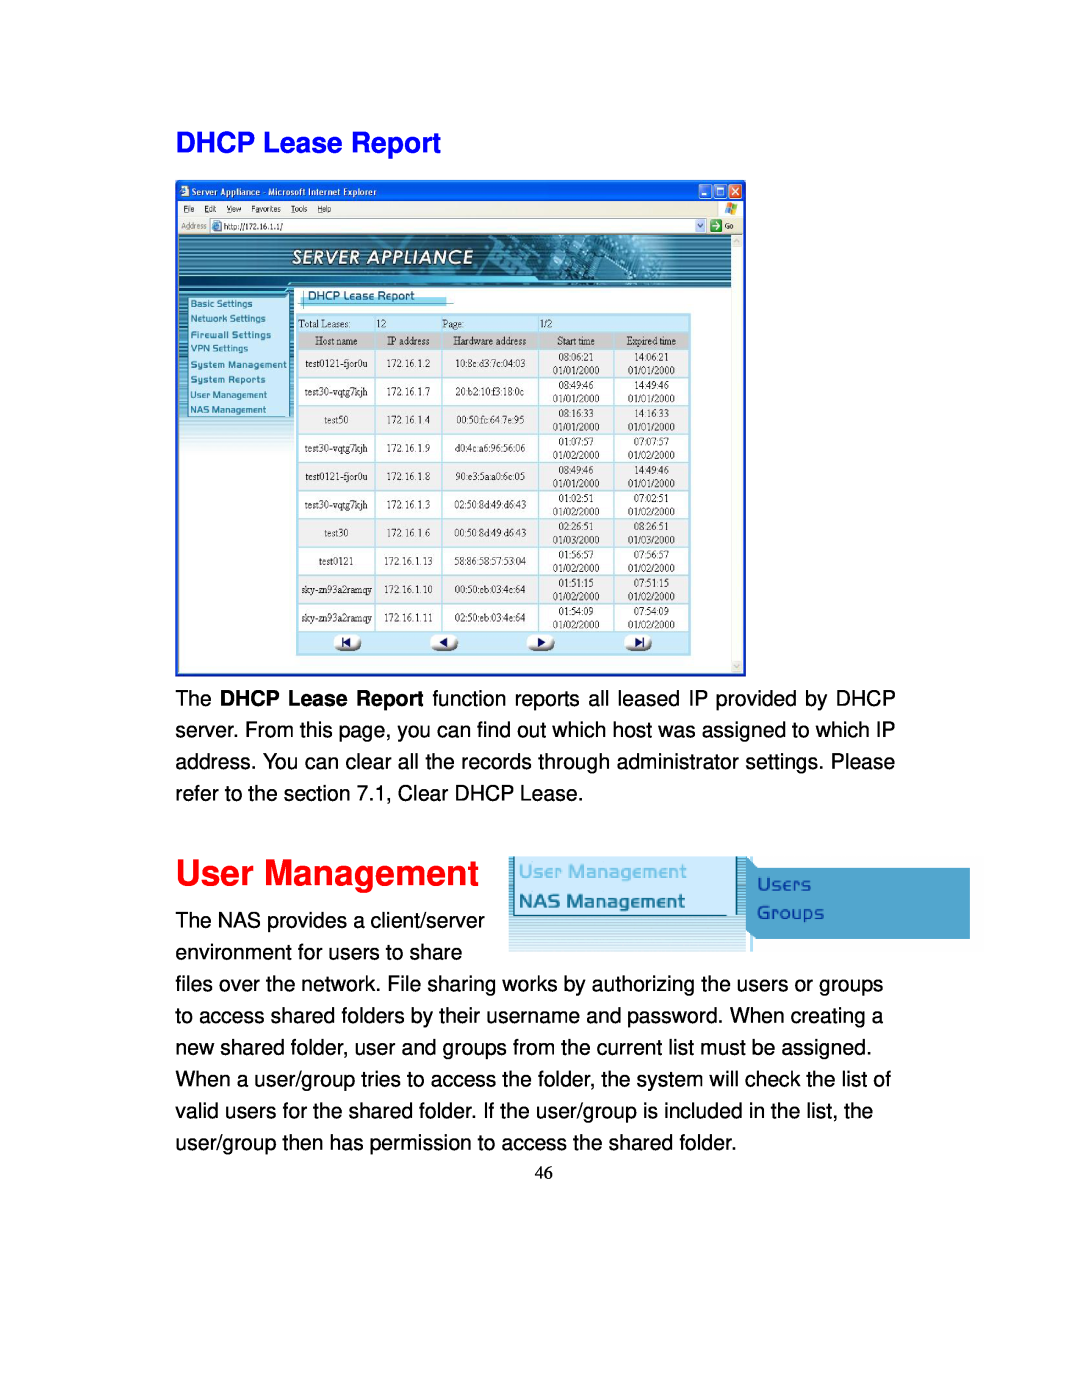 Intellinet Network Solutions 501705 manual User Management, DHCP Lease Report 